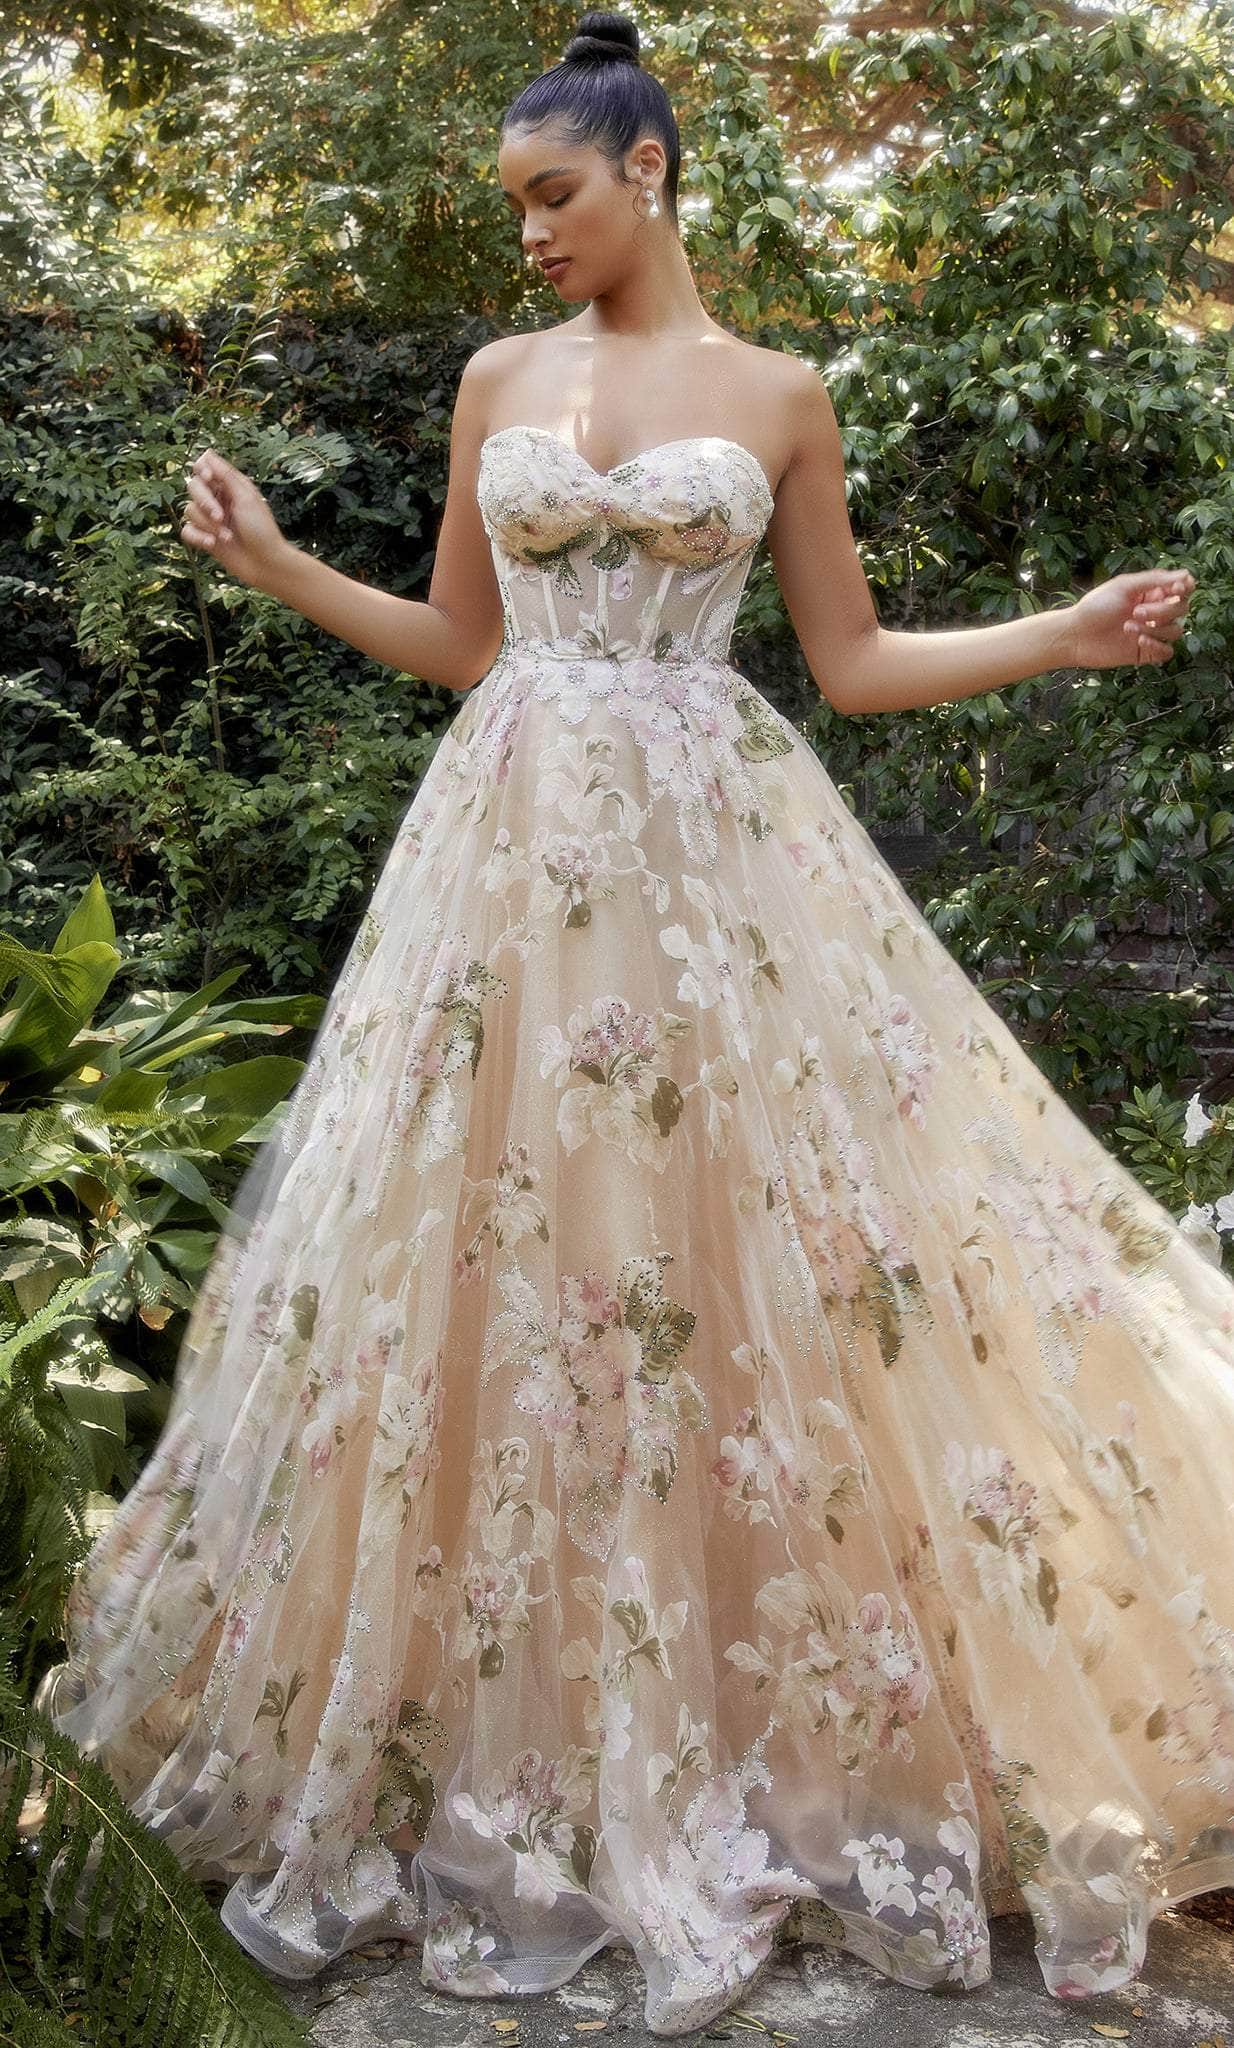 Wedding dress with bustier bodice and floral embroidery